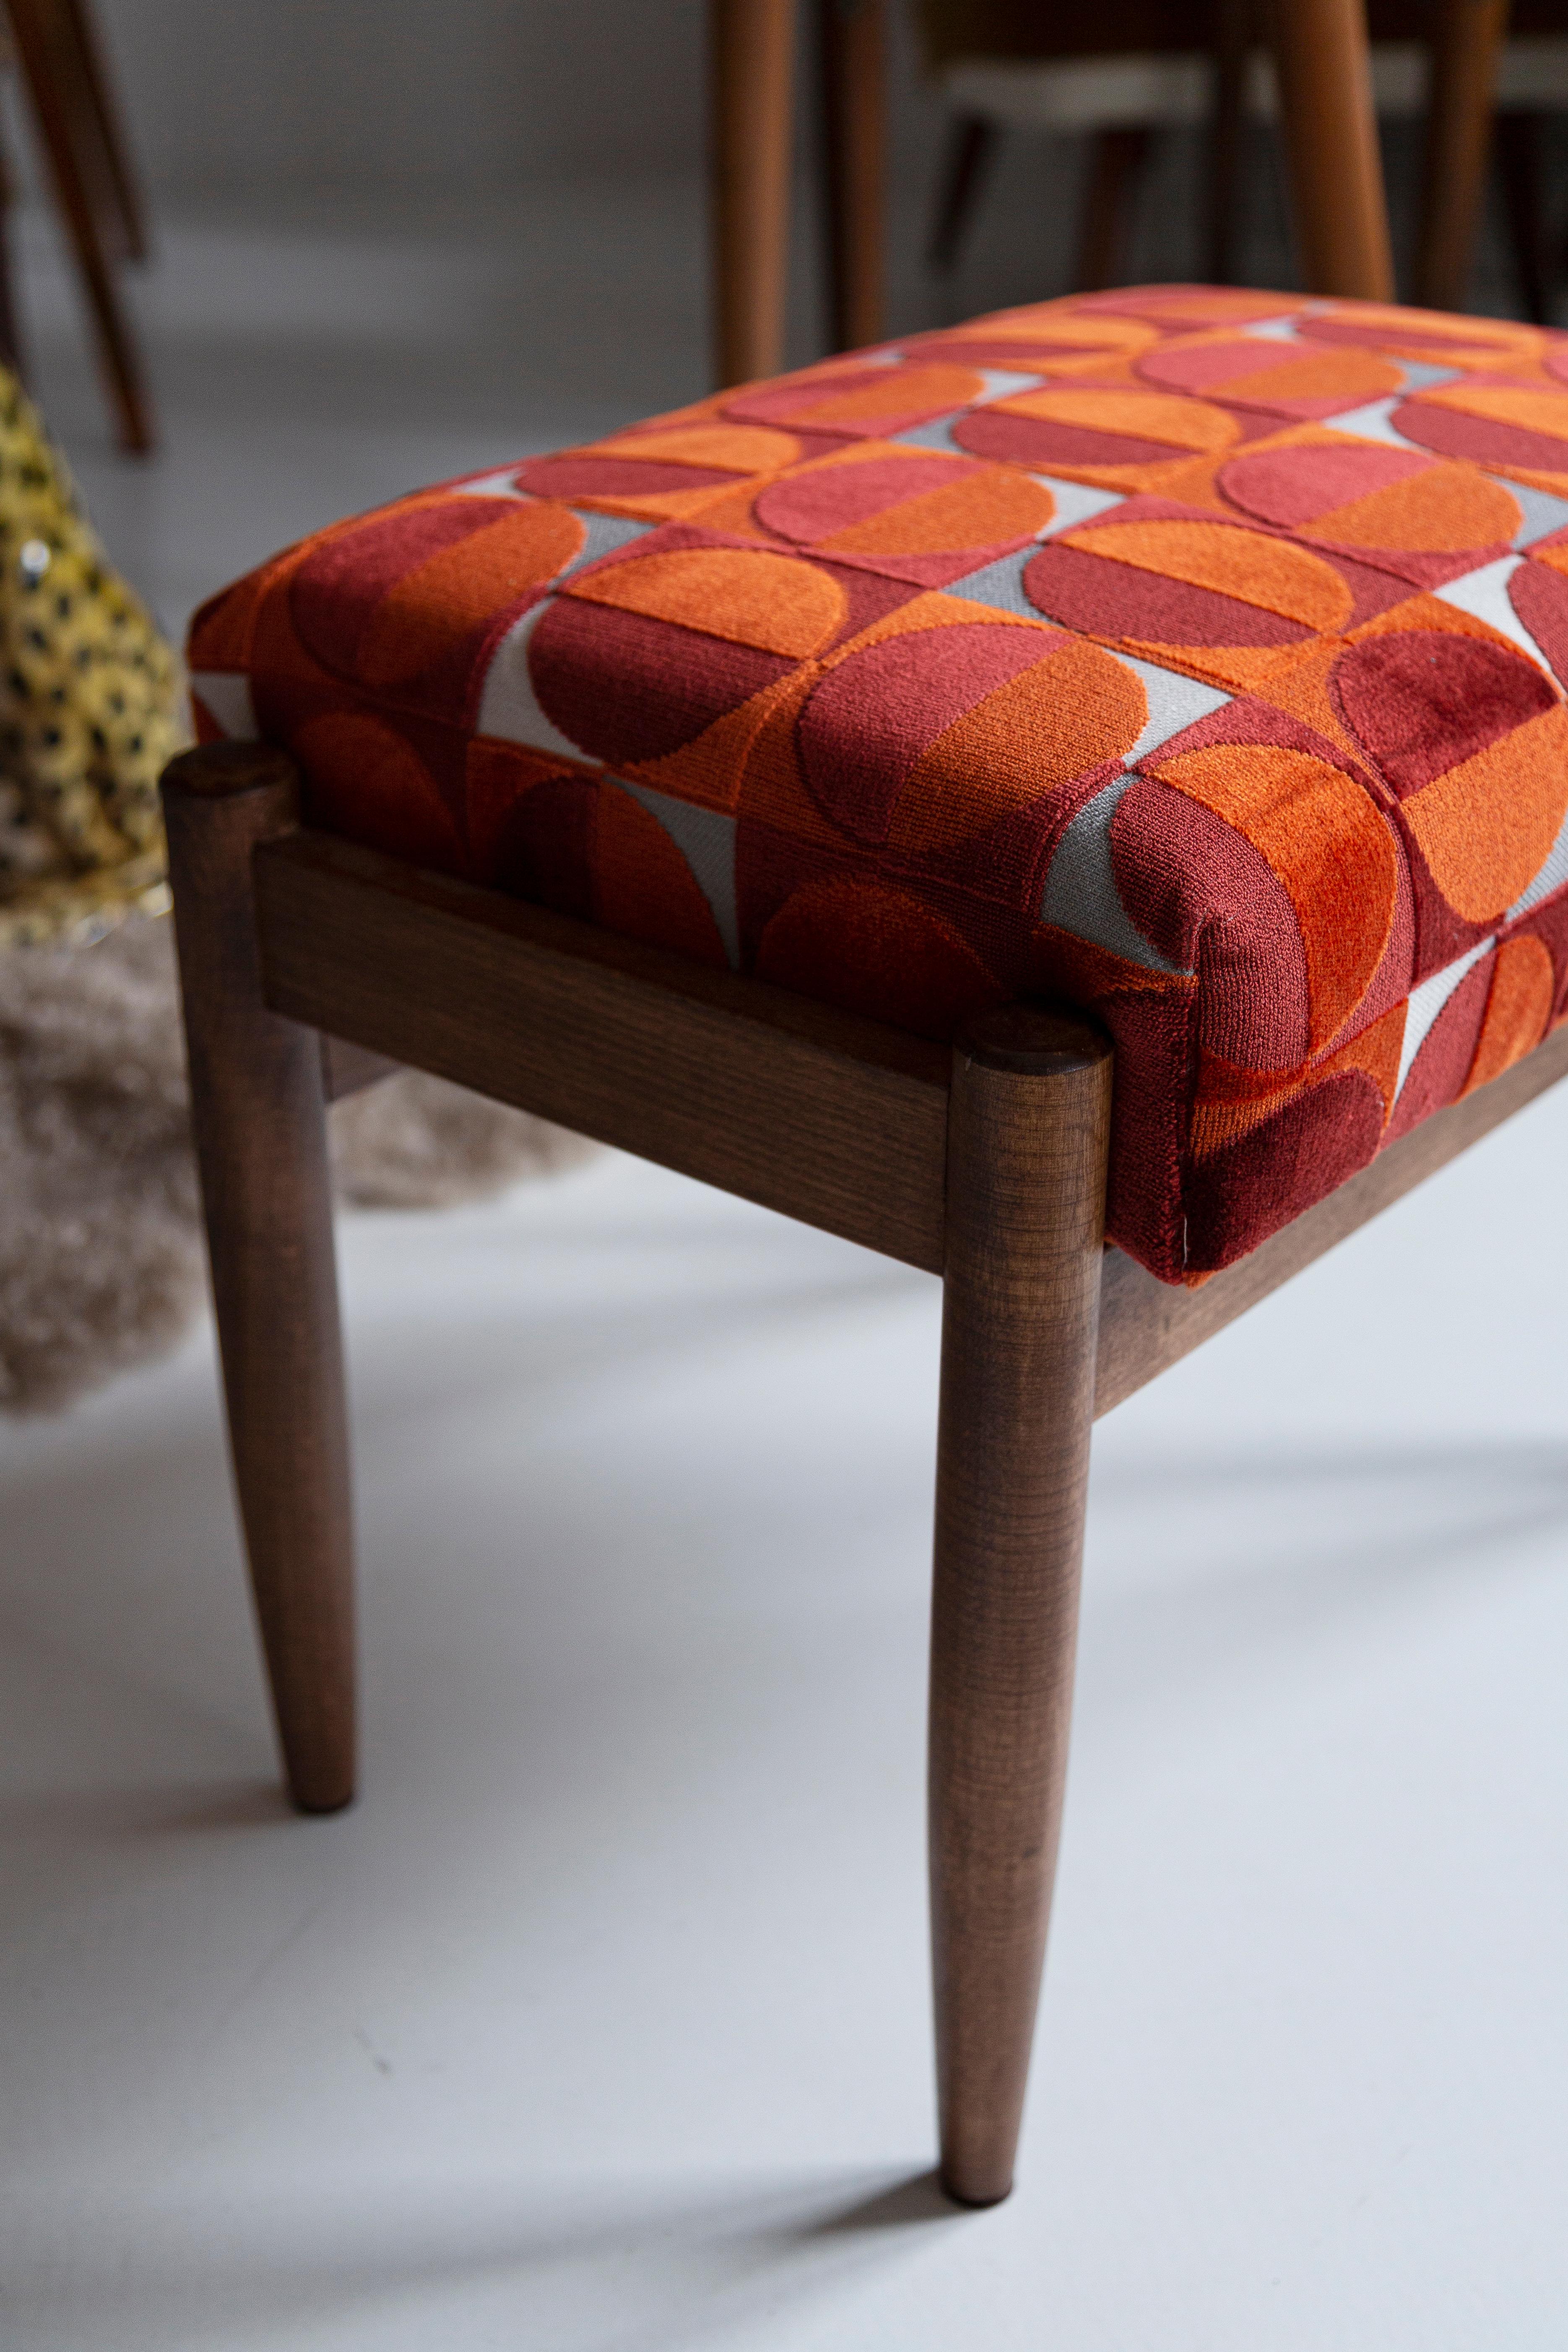 Stools from the turn of the 1960s. Beautiful red and orange high quality upholstery. The stools consists of an upholstered part, a seat and wooden legs narrowing downwards, characteristic of the 1960s style. We can prepare this stools also in